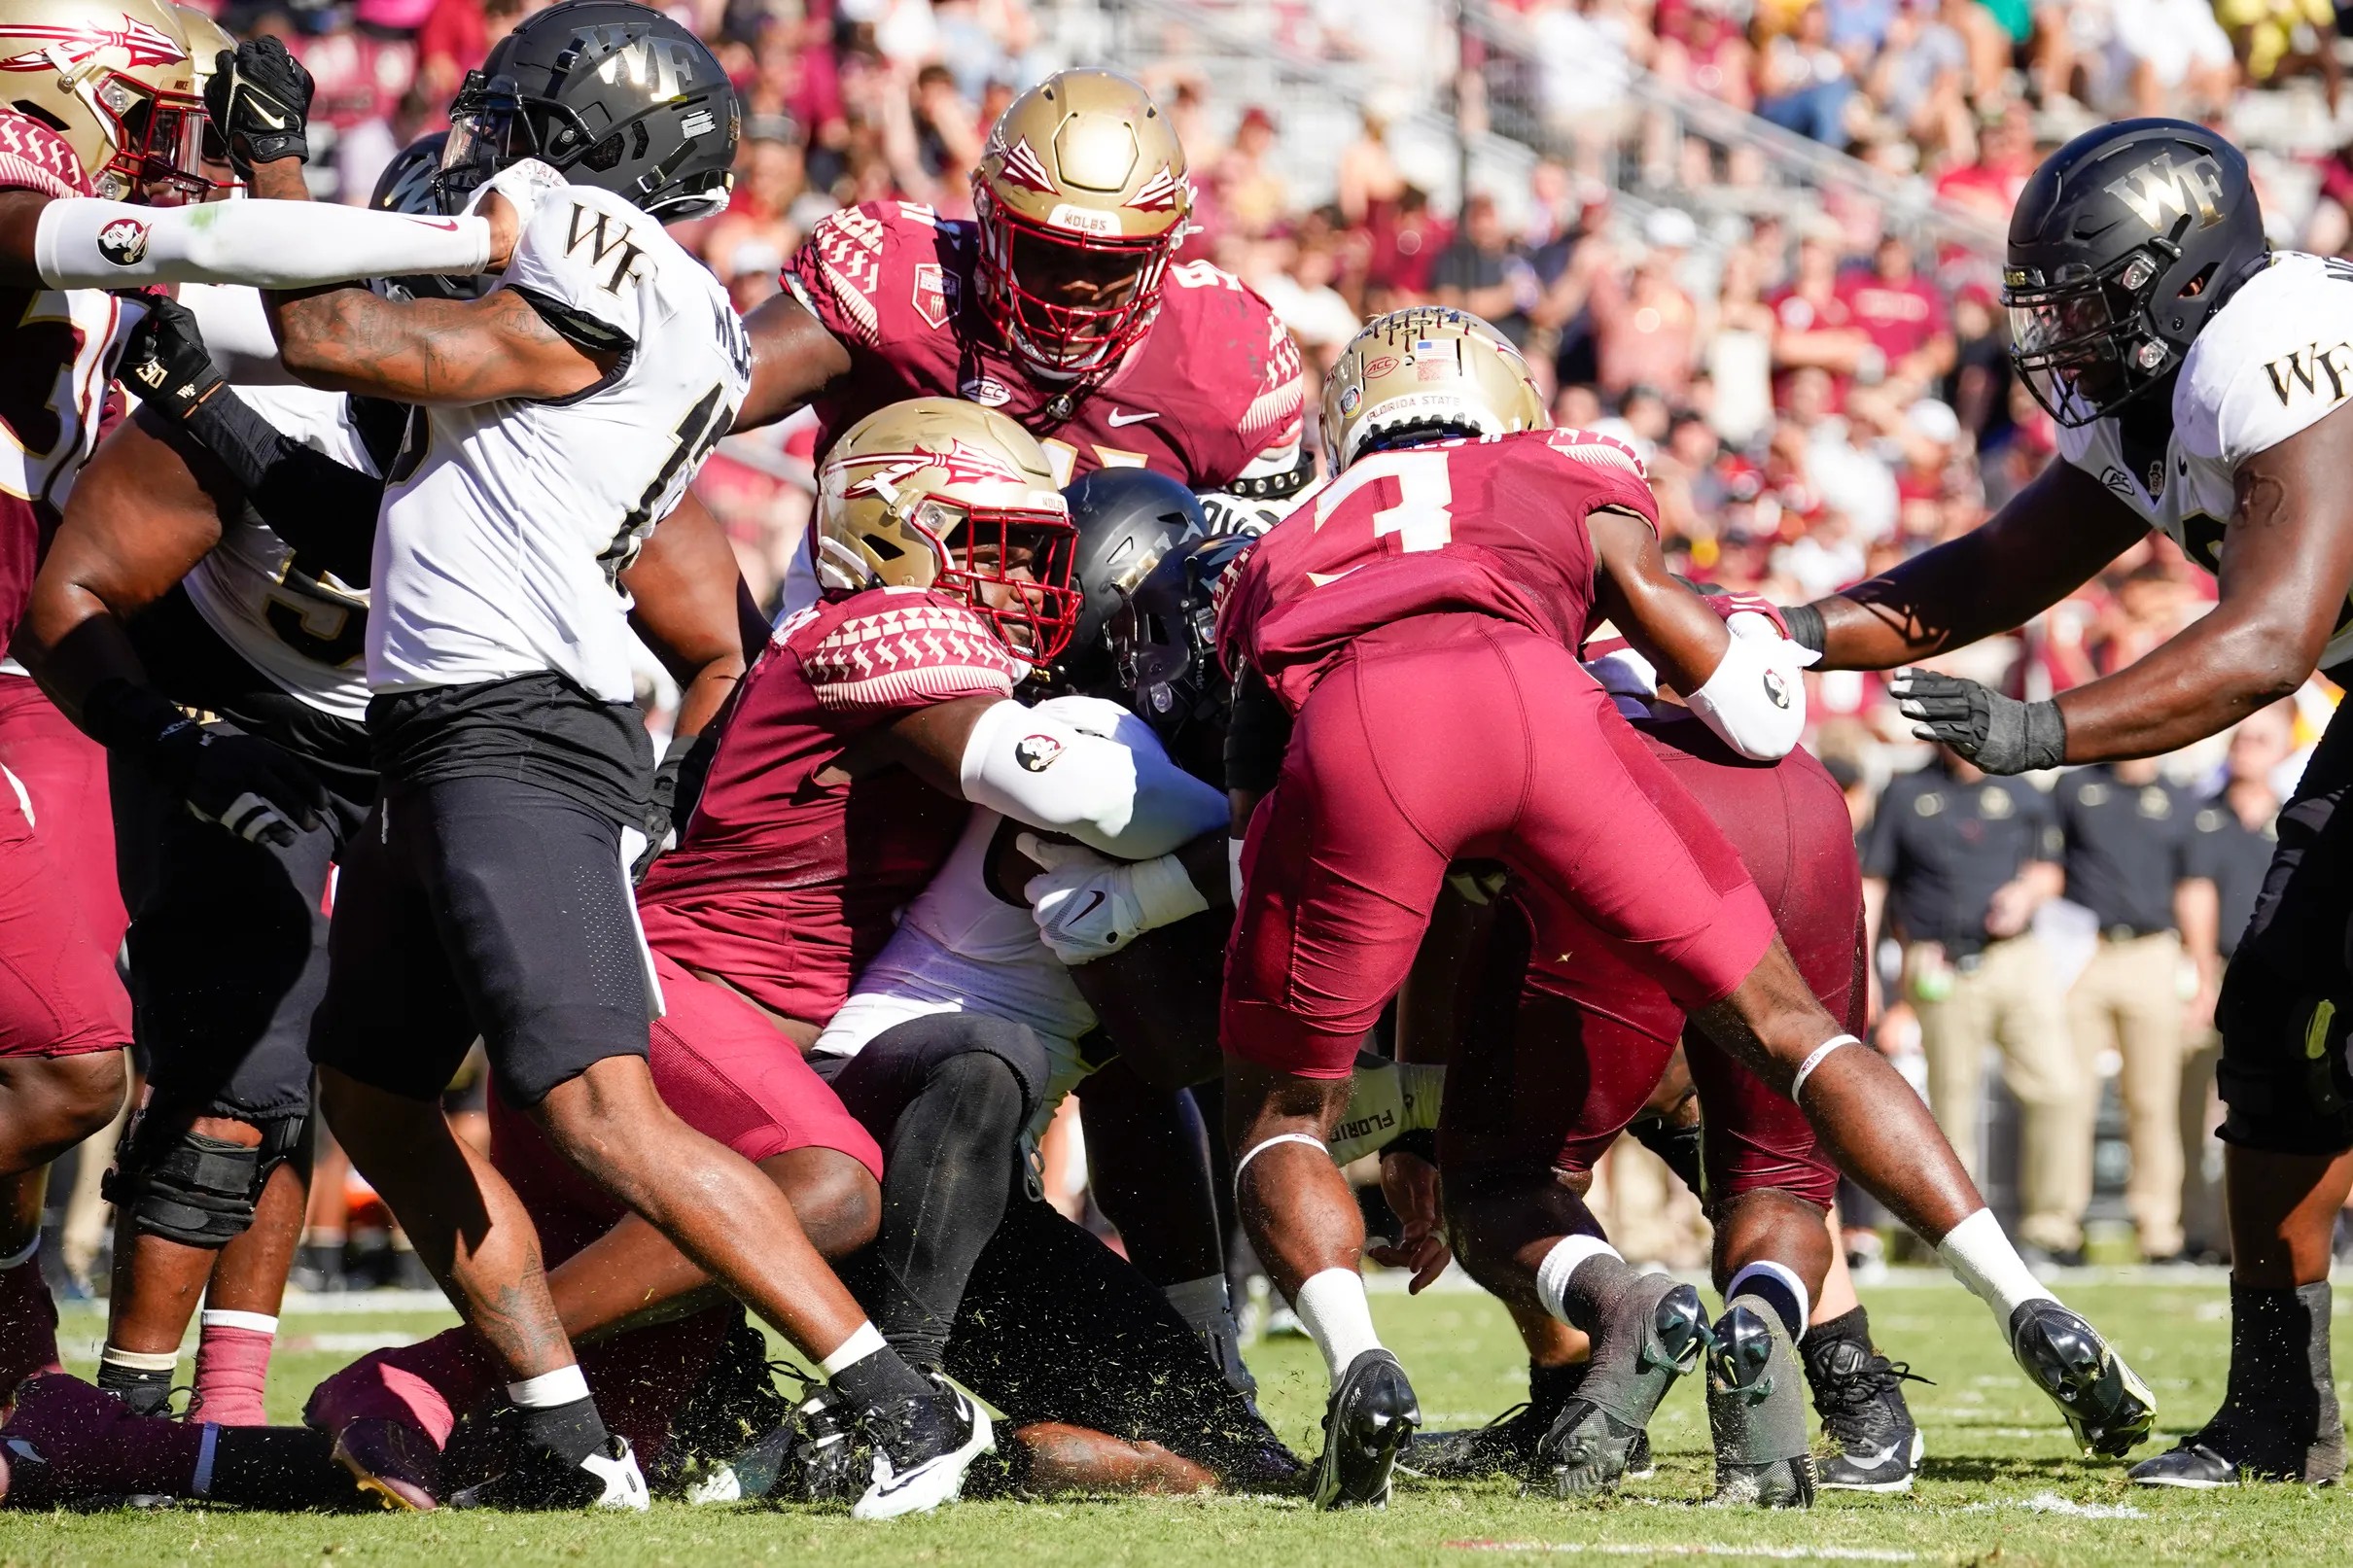 What went right, what went wrong on defense for FSU vs. Wake Forest